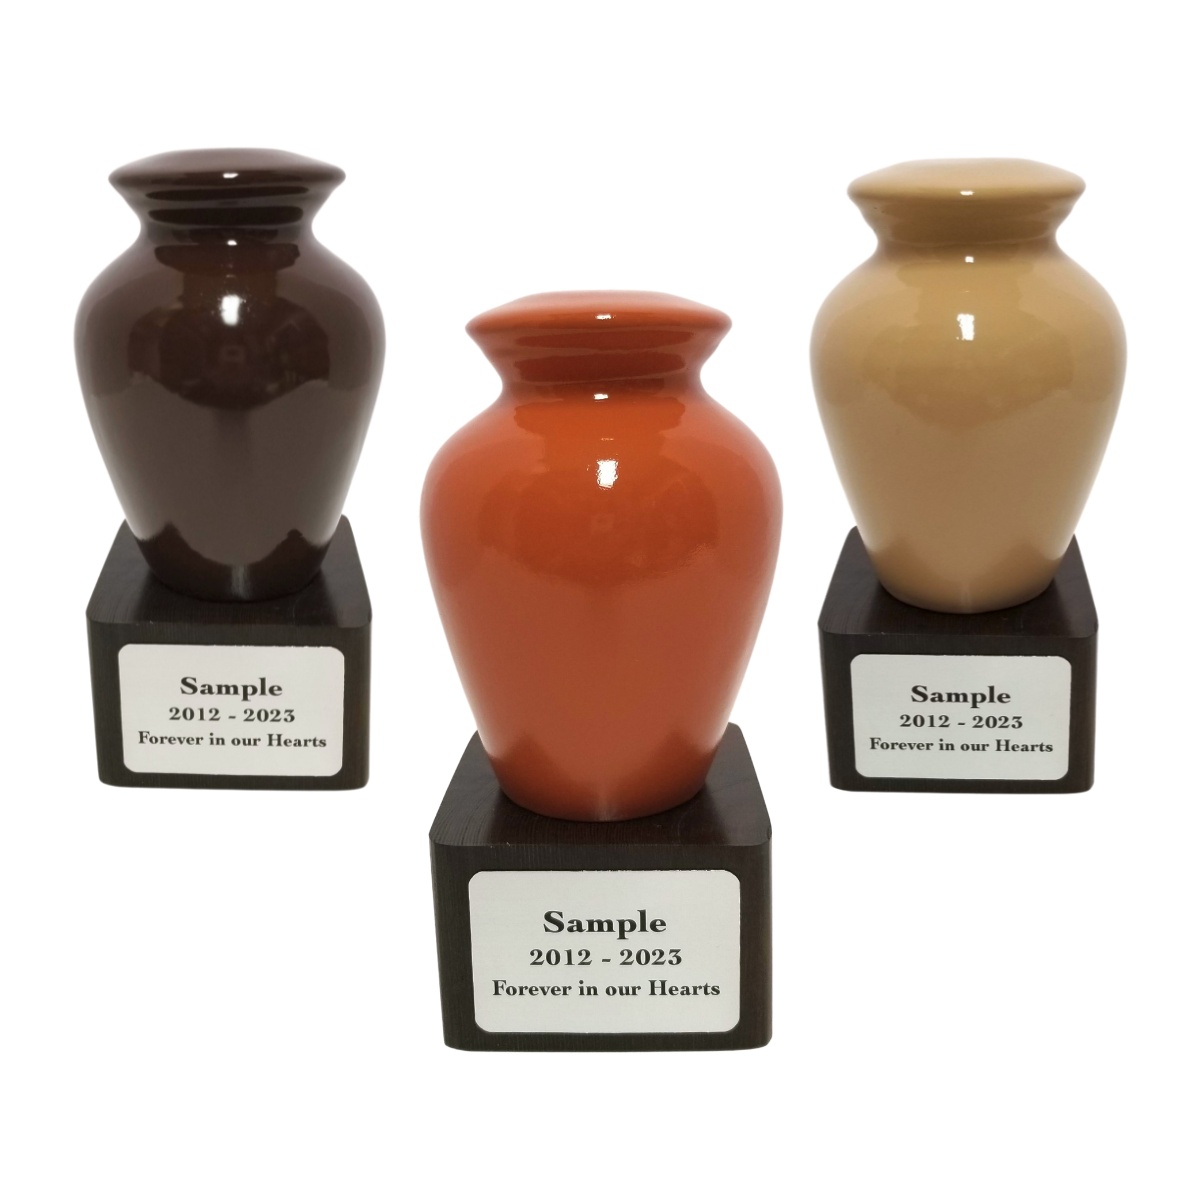 Ceramic Urn with Pedestal for cats - showing three colours: Brown, Terracotta and Beige